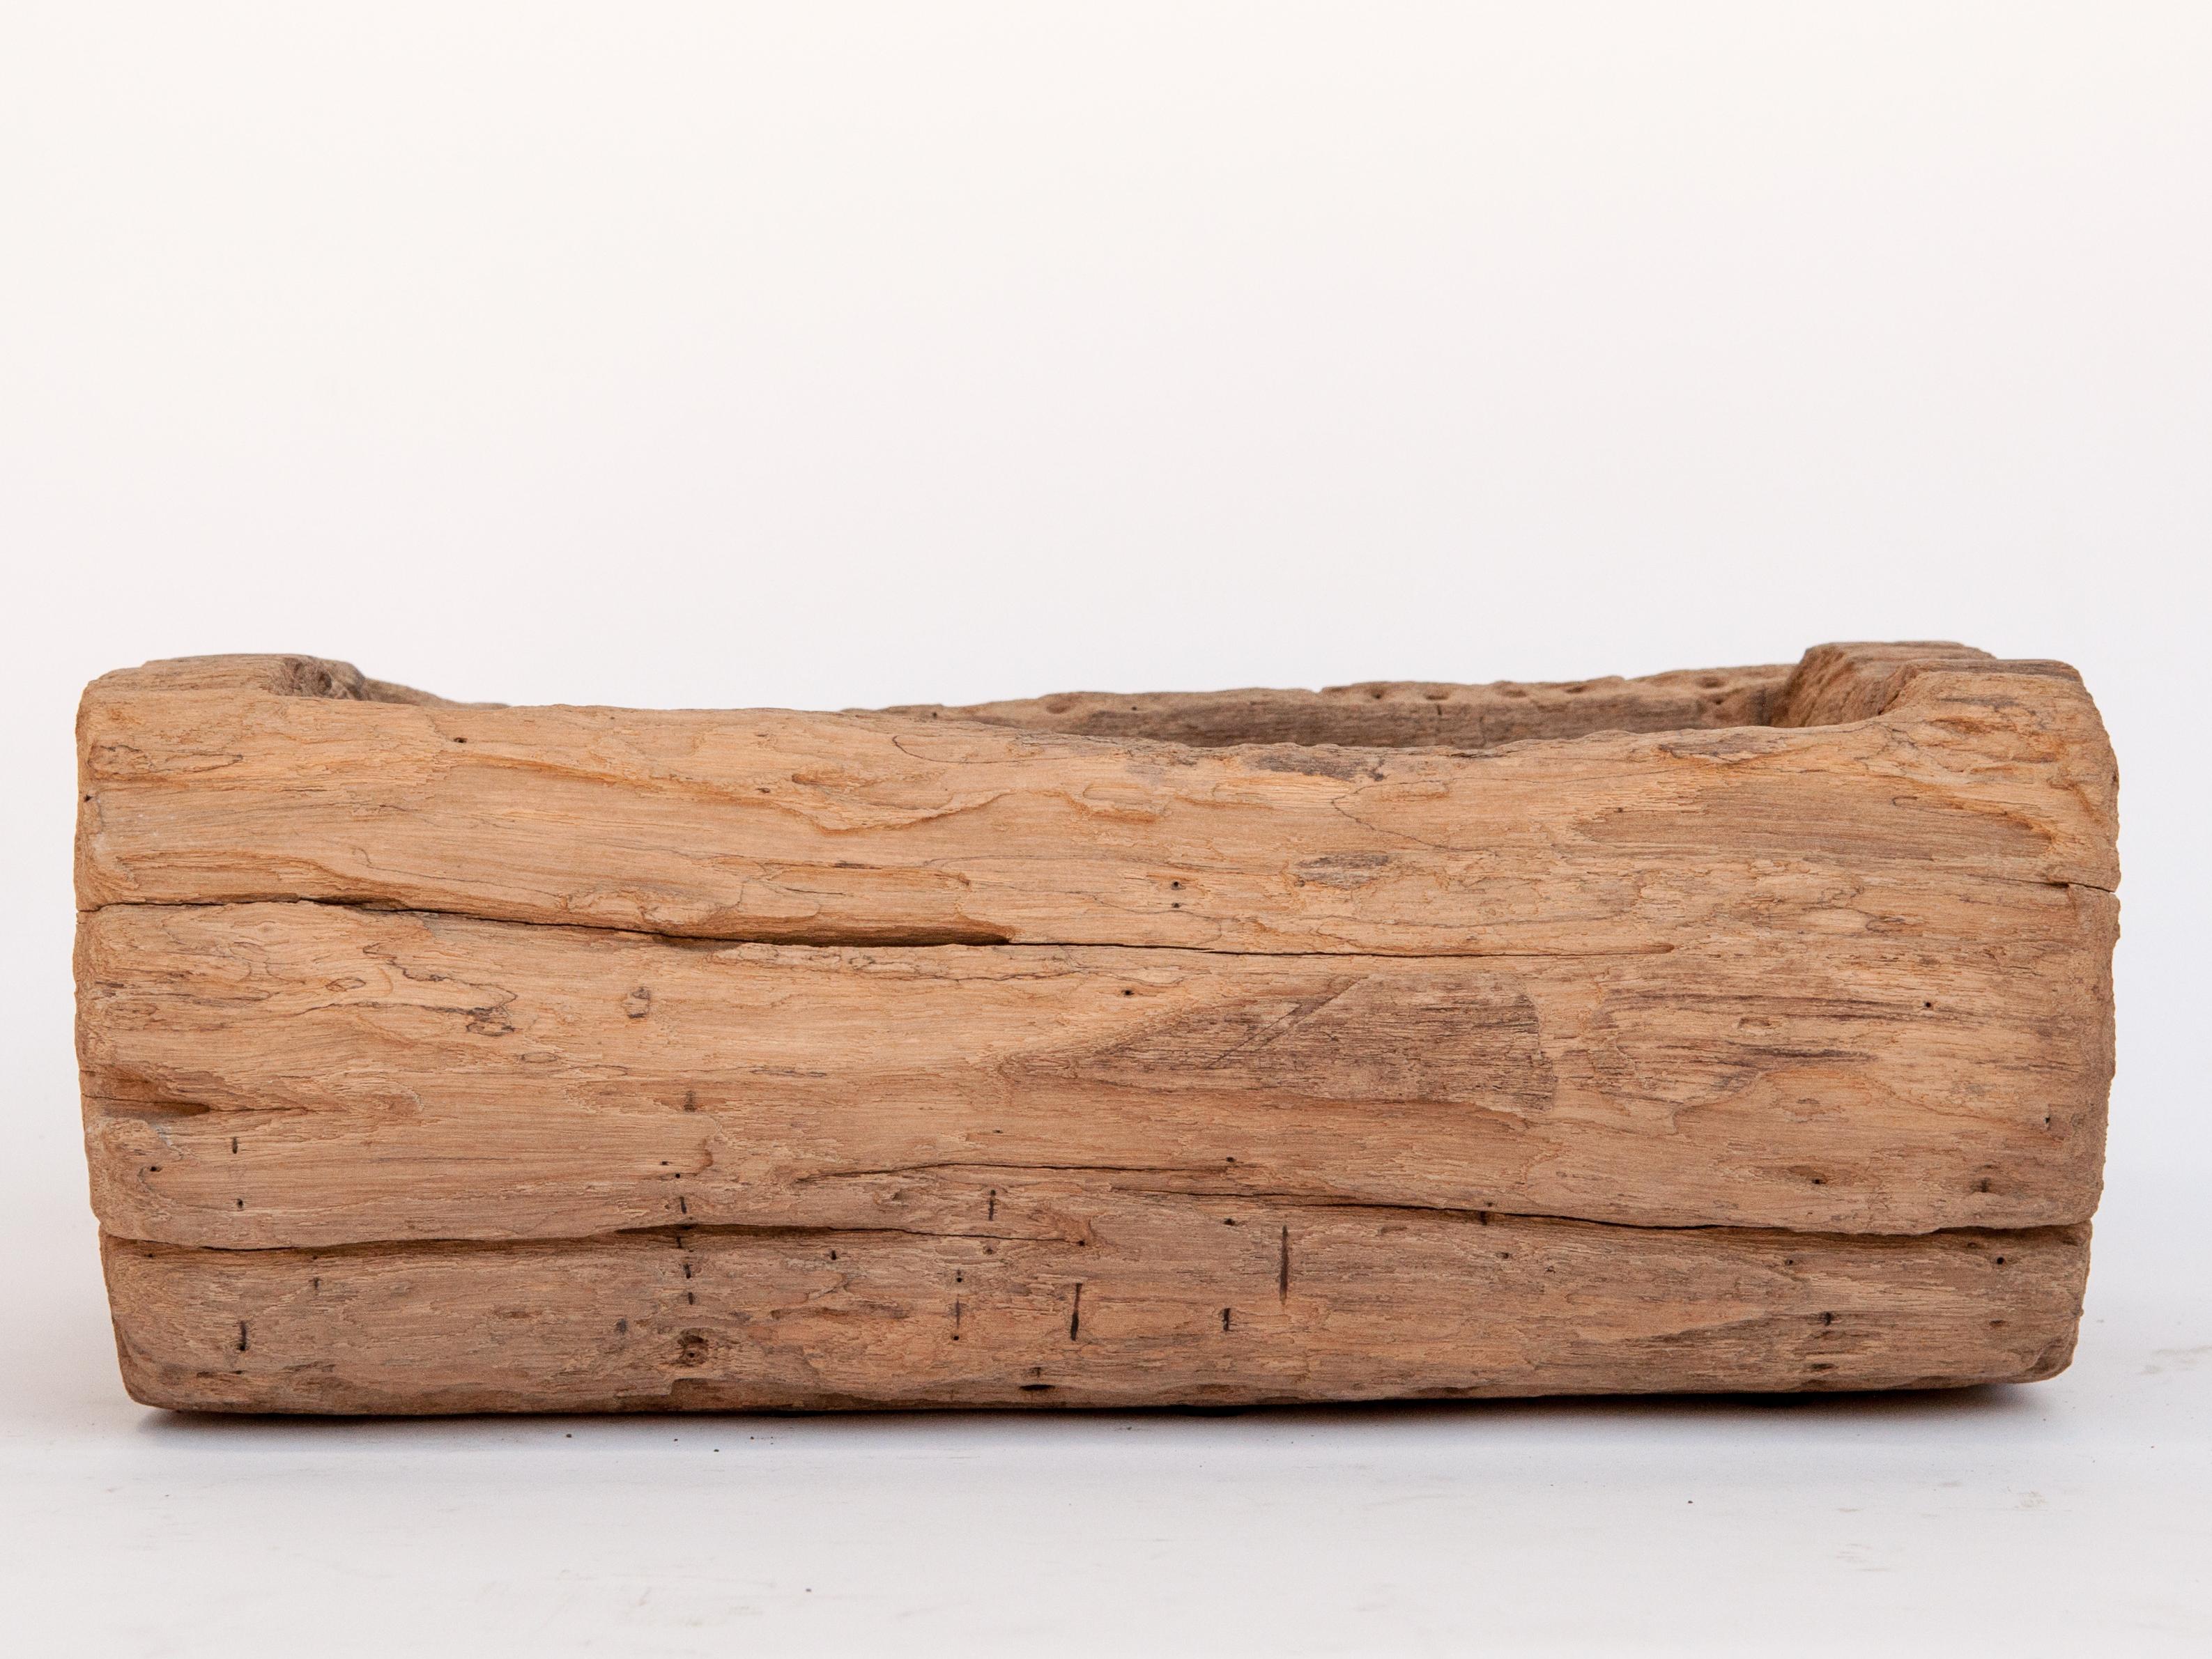 Rustic Old Eroded Teak Trough Planter, North Thailand, Mid-20th Century